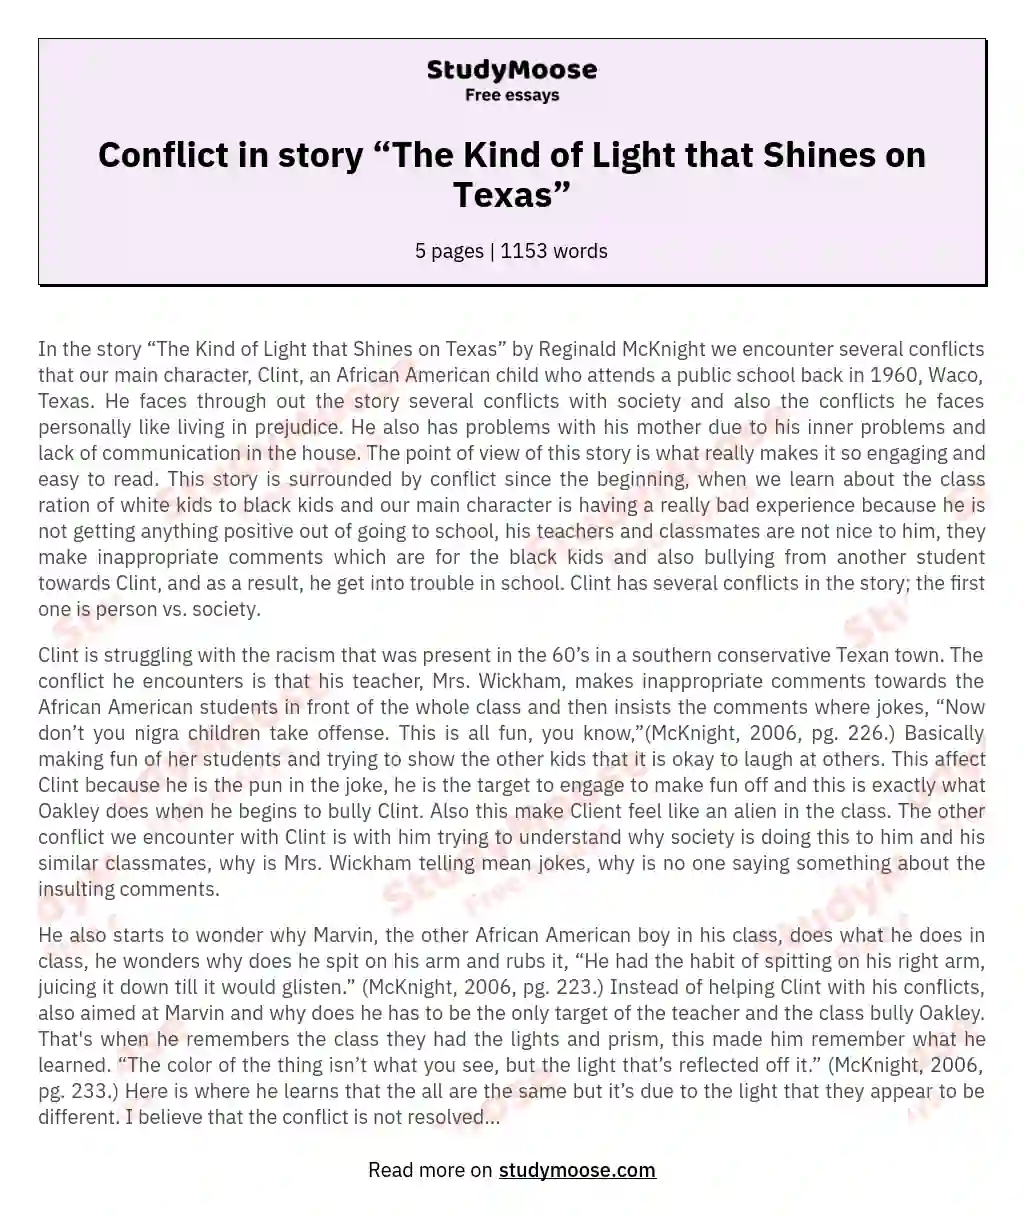 Conflict in story “The Kind of Light that Shines on Texas” essay